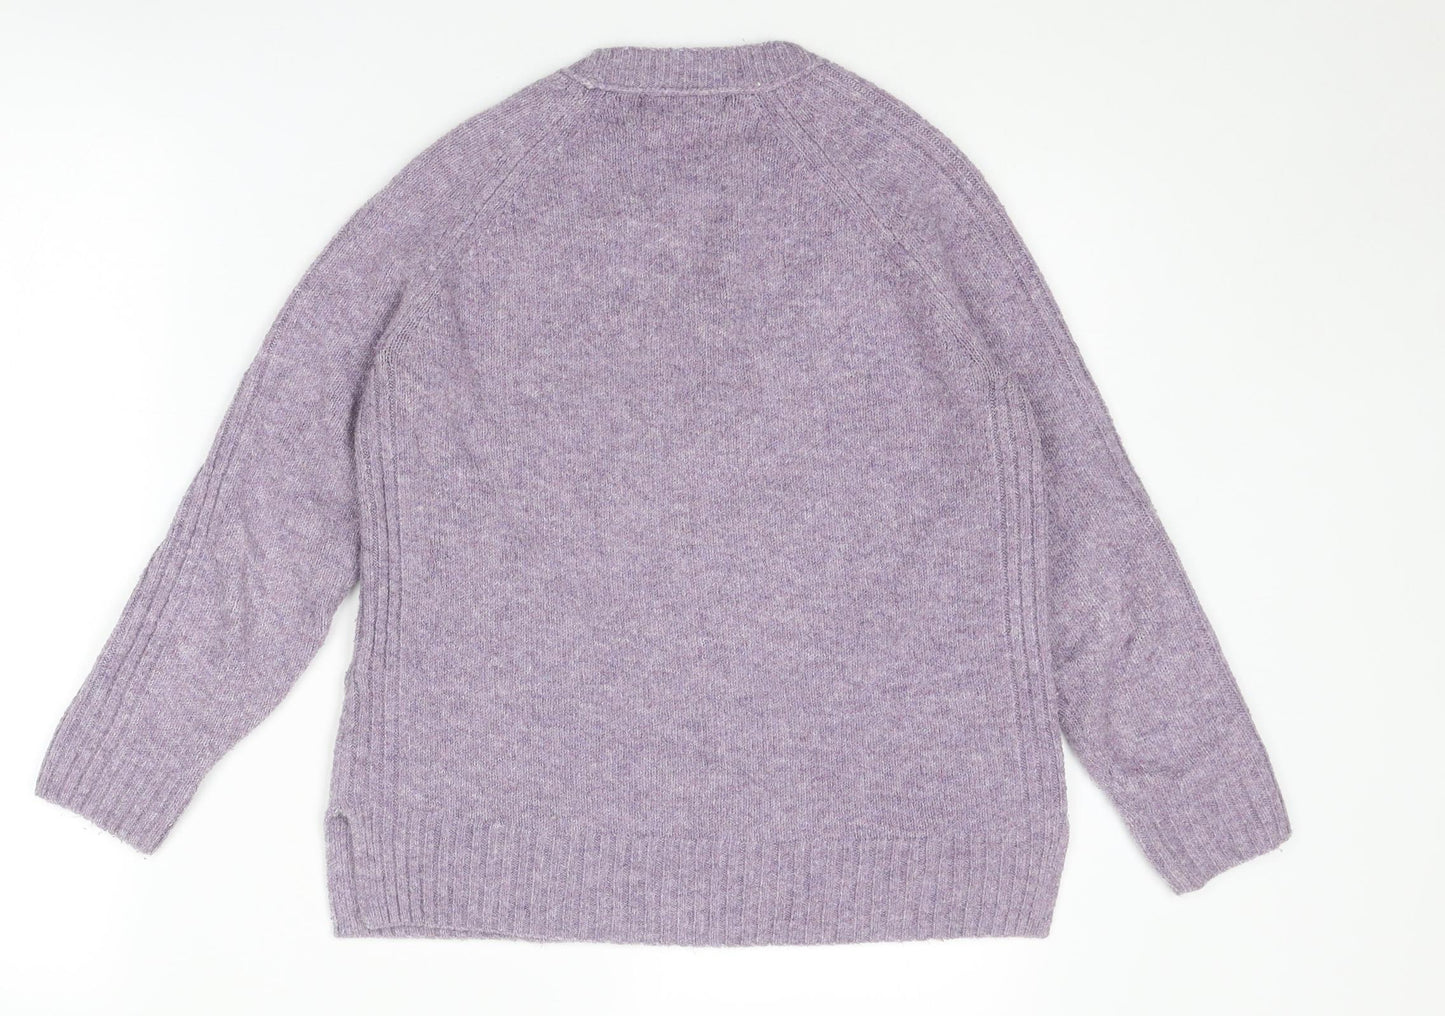 Marks and Spencer Womens Purple Round Neck Acrylic Pullover Jumper Size S